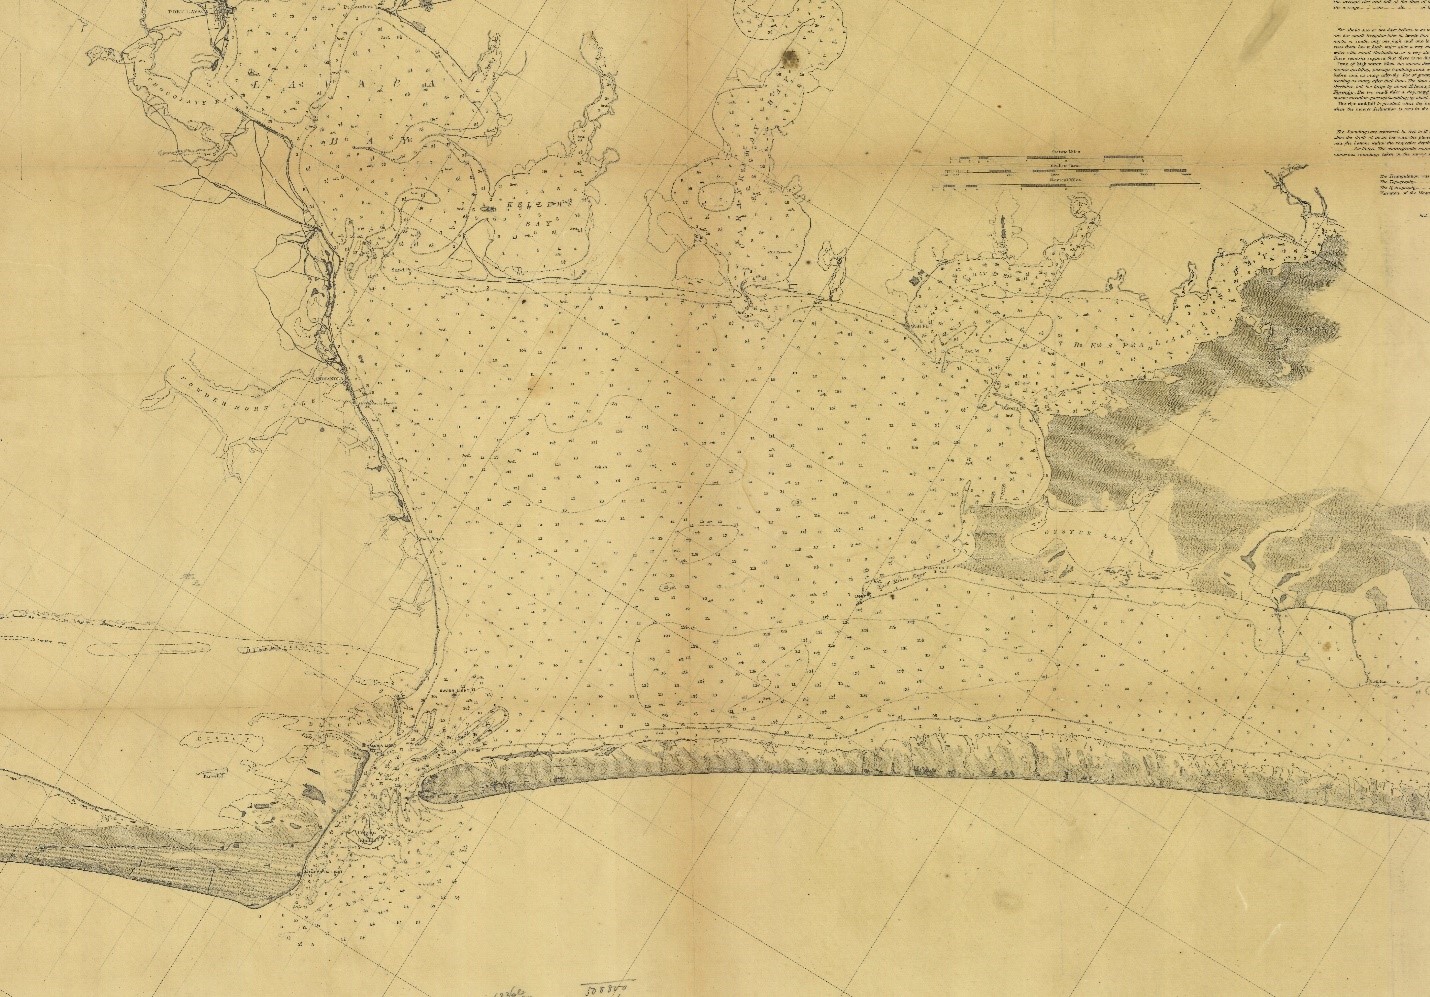 A contour line map rendering of Matagorda Bay, Texas, Chart 107 produced by the United States Coastal Survey in 1872. The map illustrates the shoreline and bay features and shows water depths listed in feet. Important local 19th-century ports such as Indianola and Saluria are labeled. 